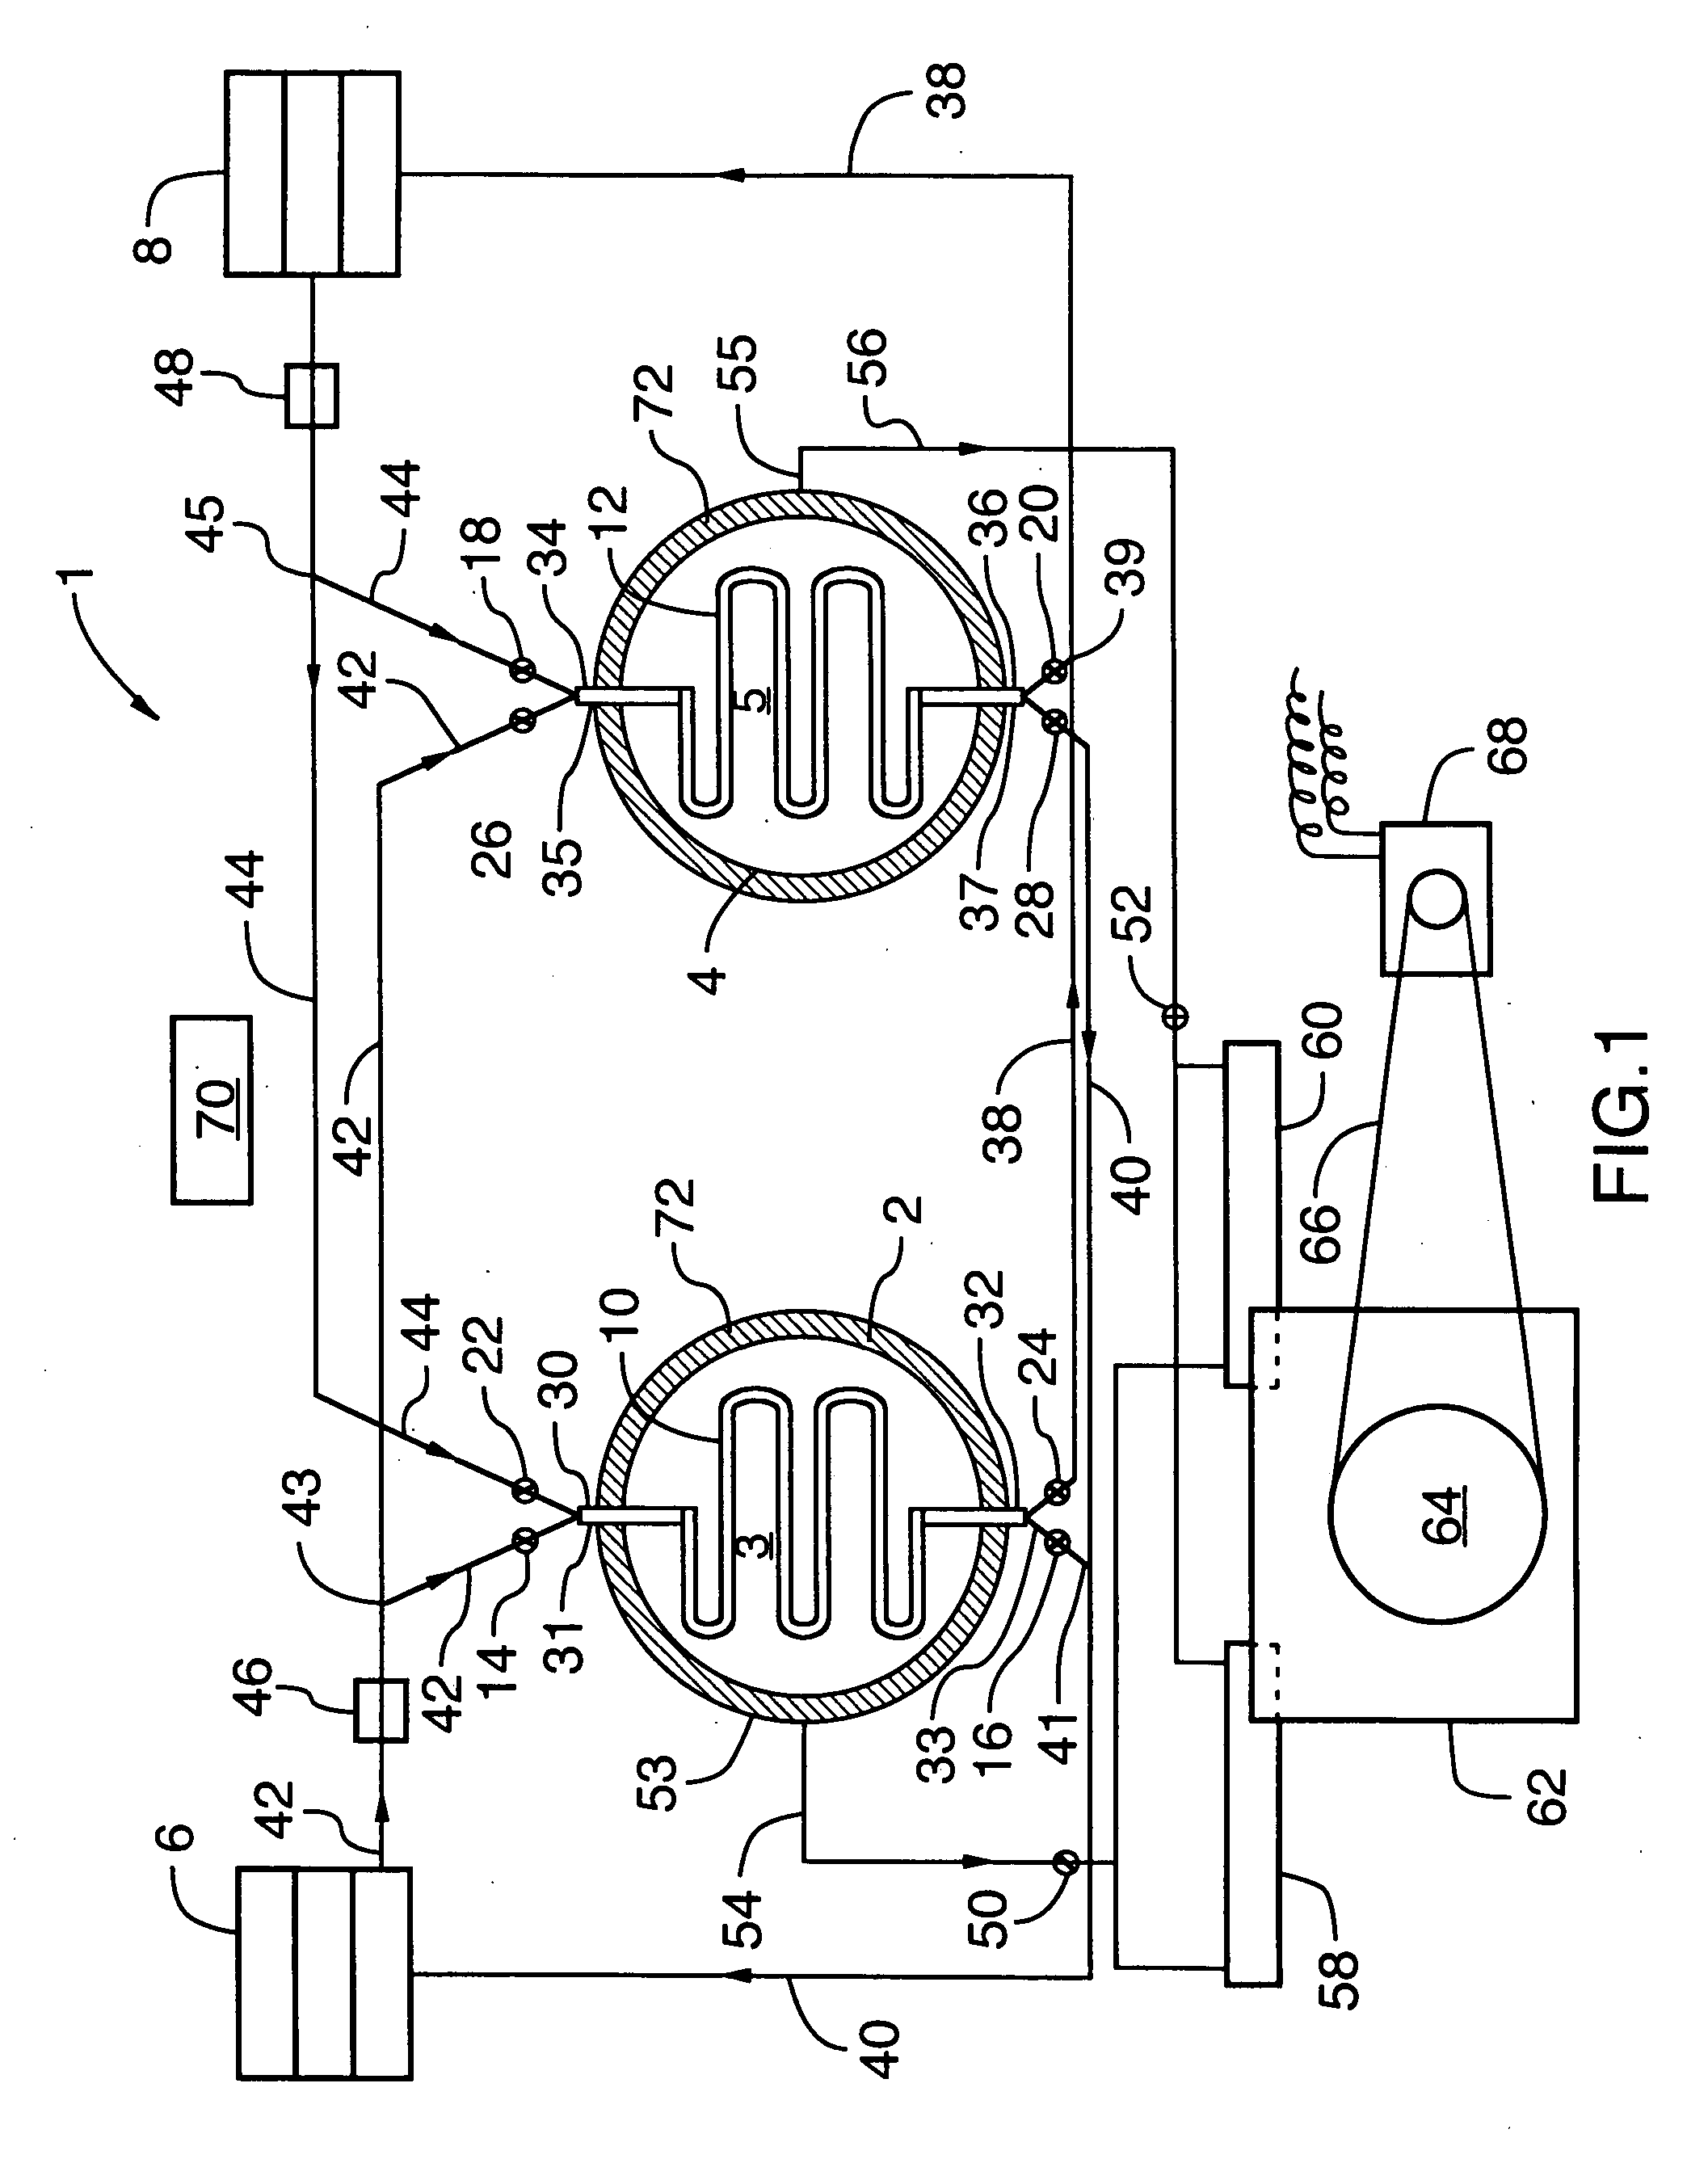 Thermal conversion device and process